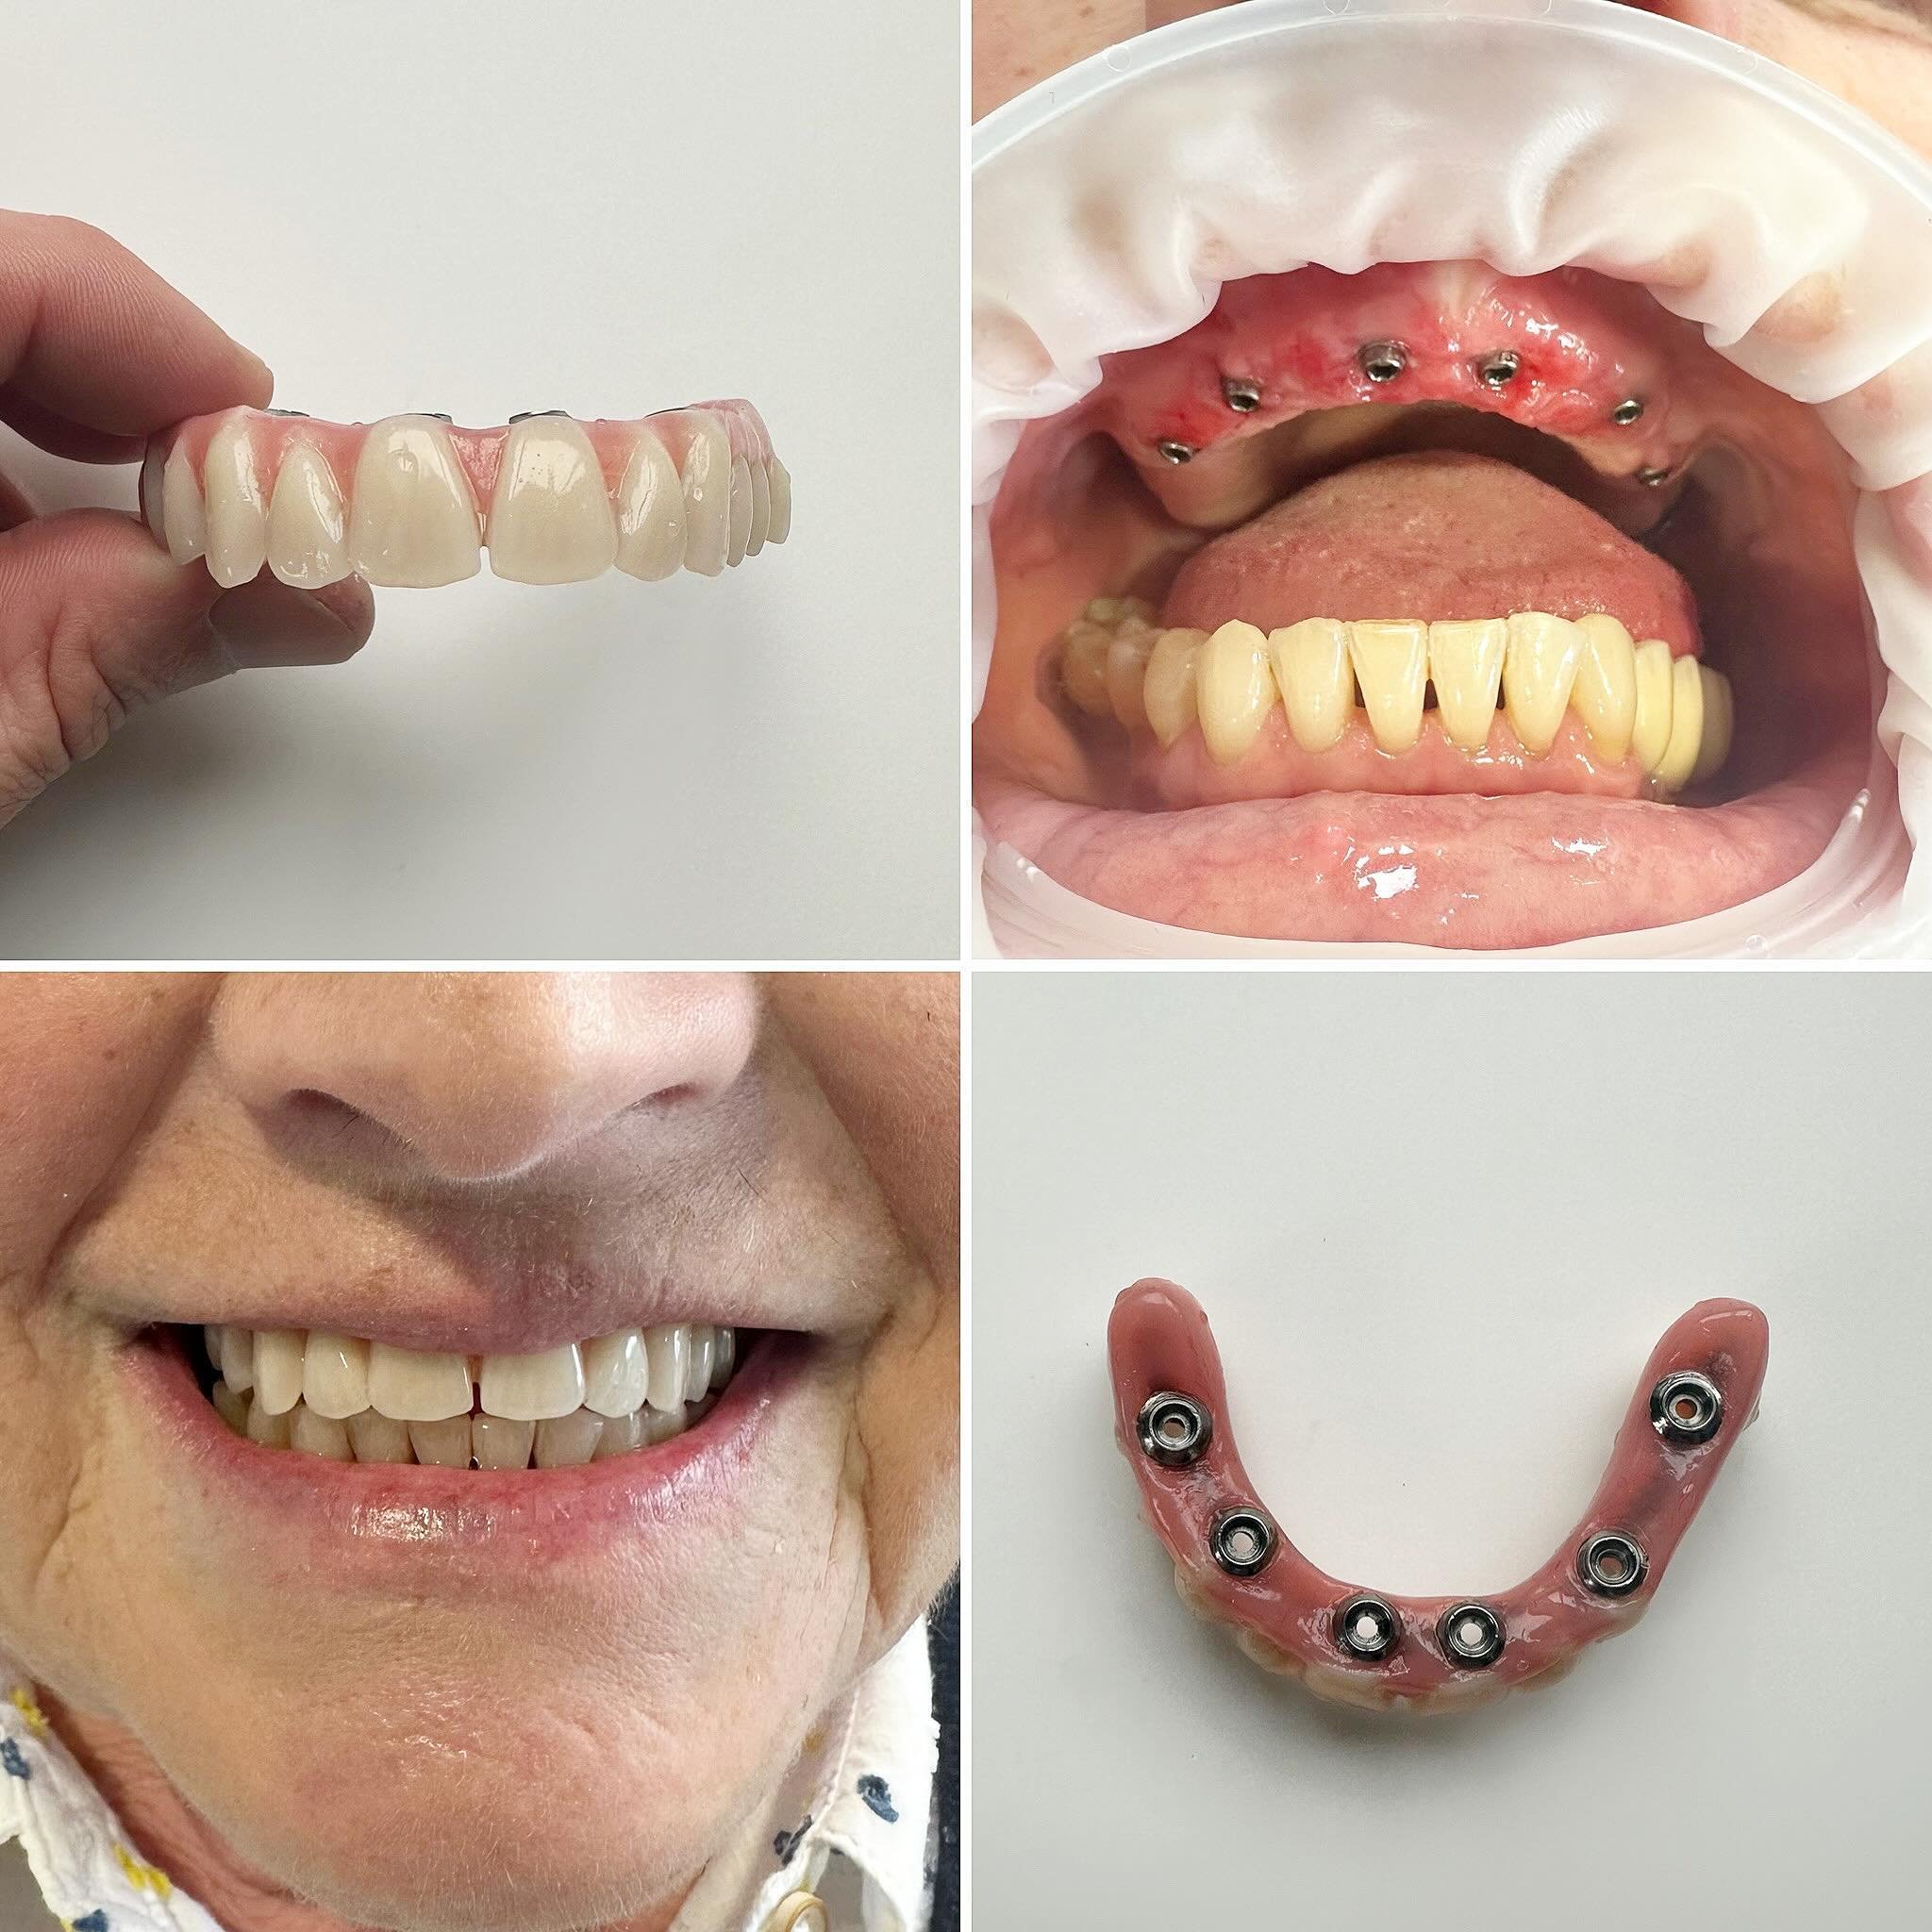 Dental Implants can change lives 👌👍🏻
From not smiling or eating properly, to #confident #natural smiles 😃 

#fullarch Friday 😆 hate to use the pun
#implantology @onebyonedental ♾️